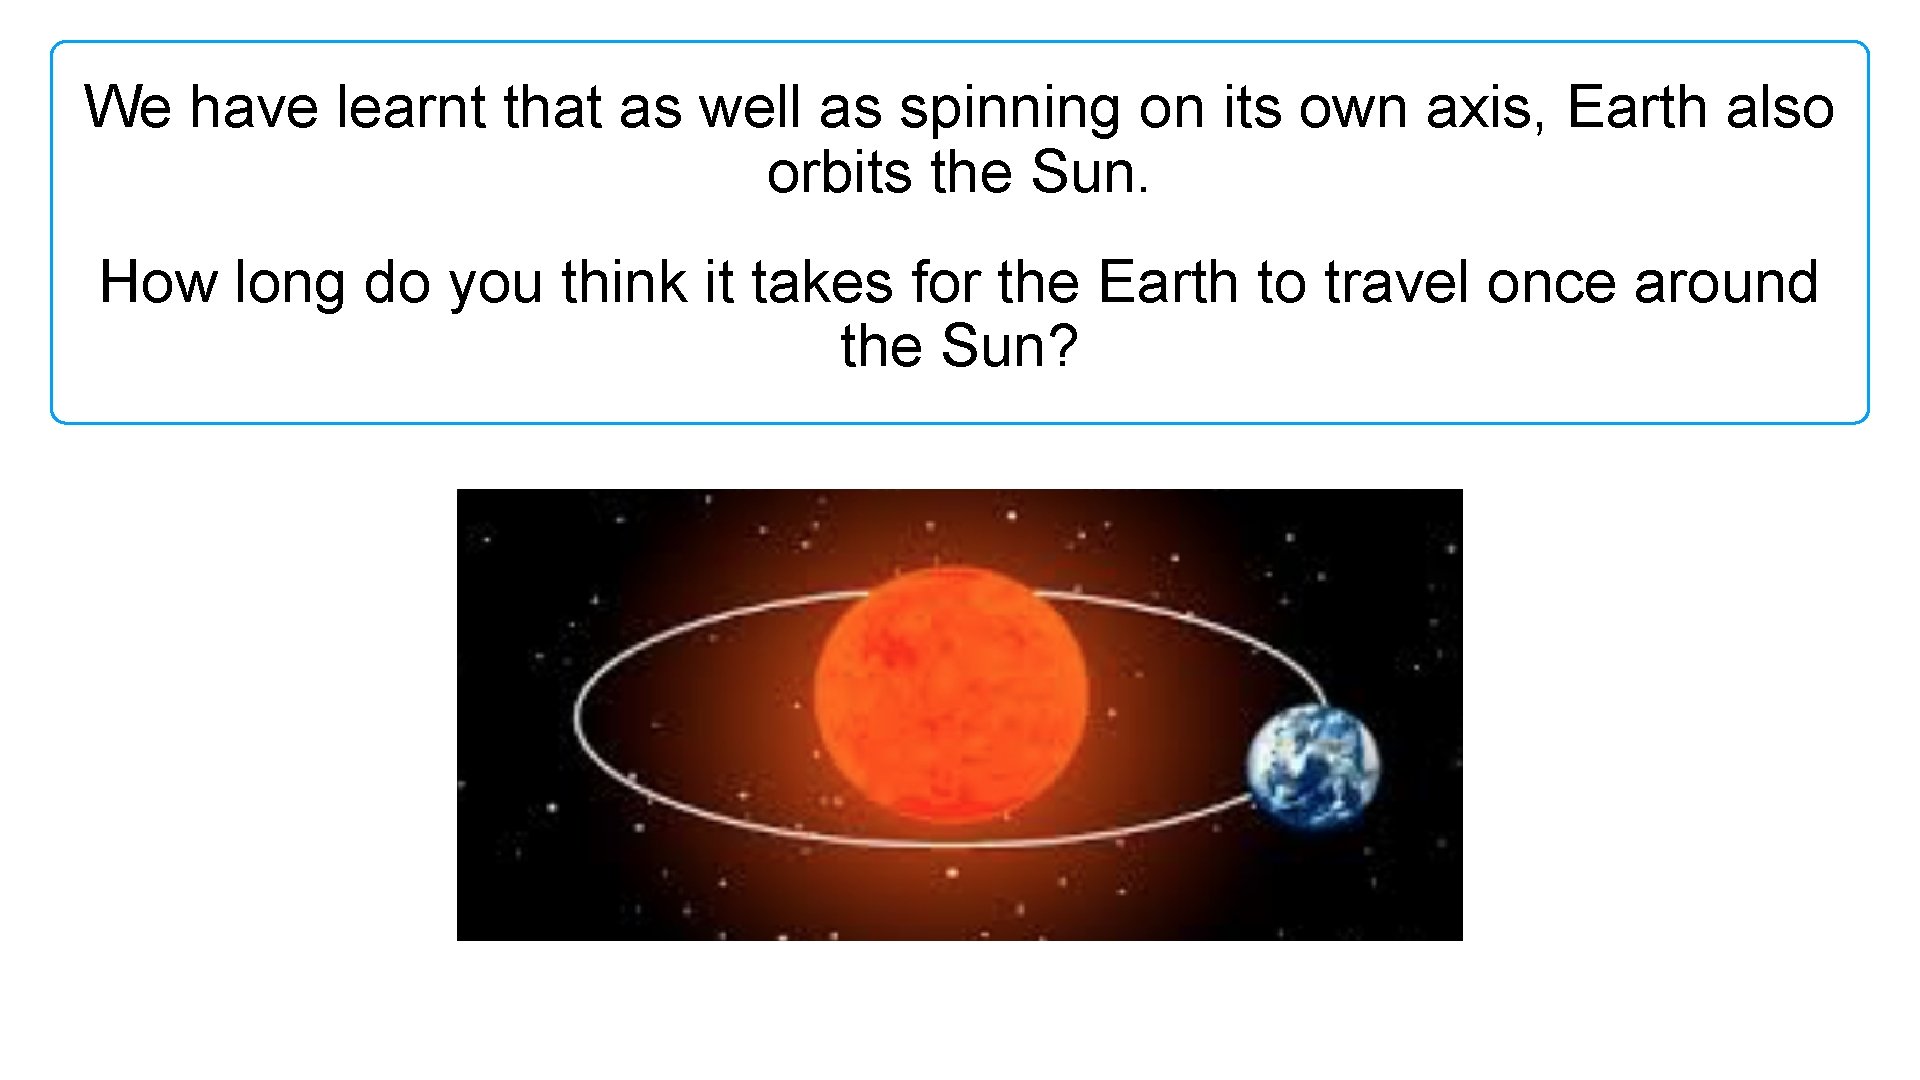 We have learnt that as well as spinning on its own axis, Earth also